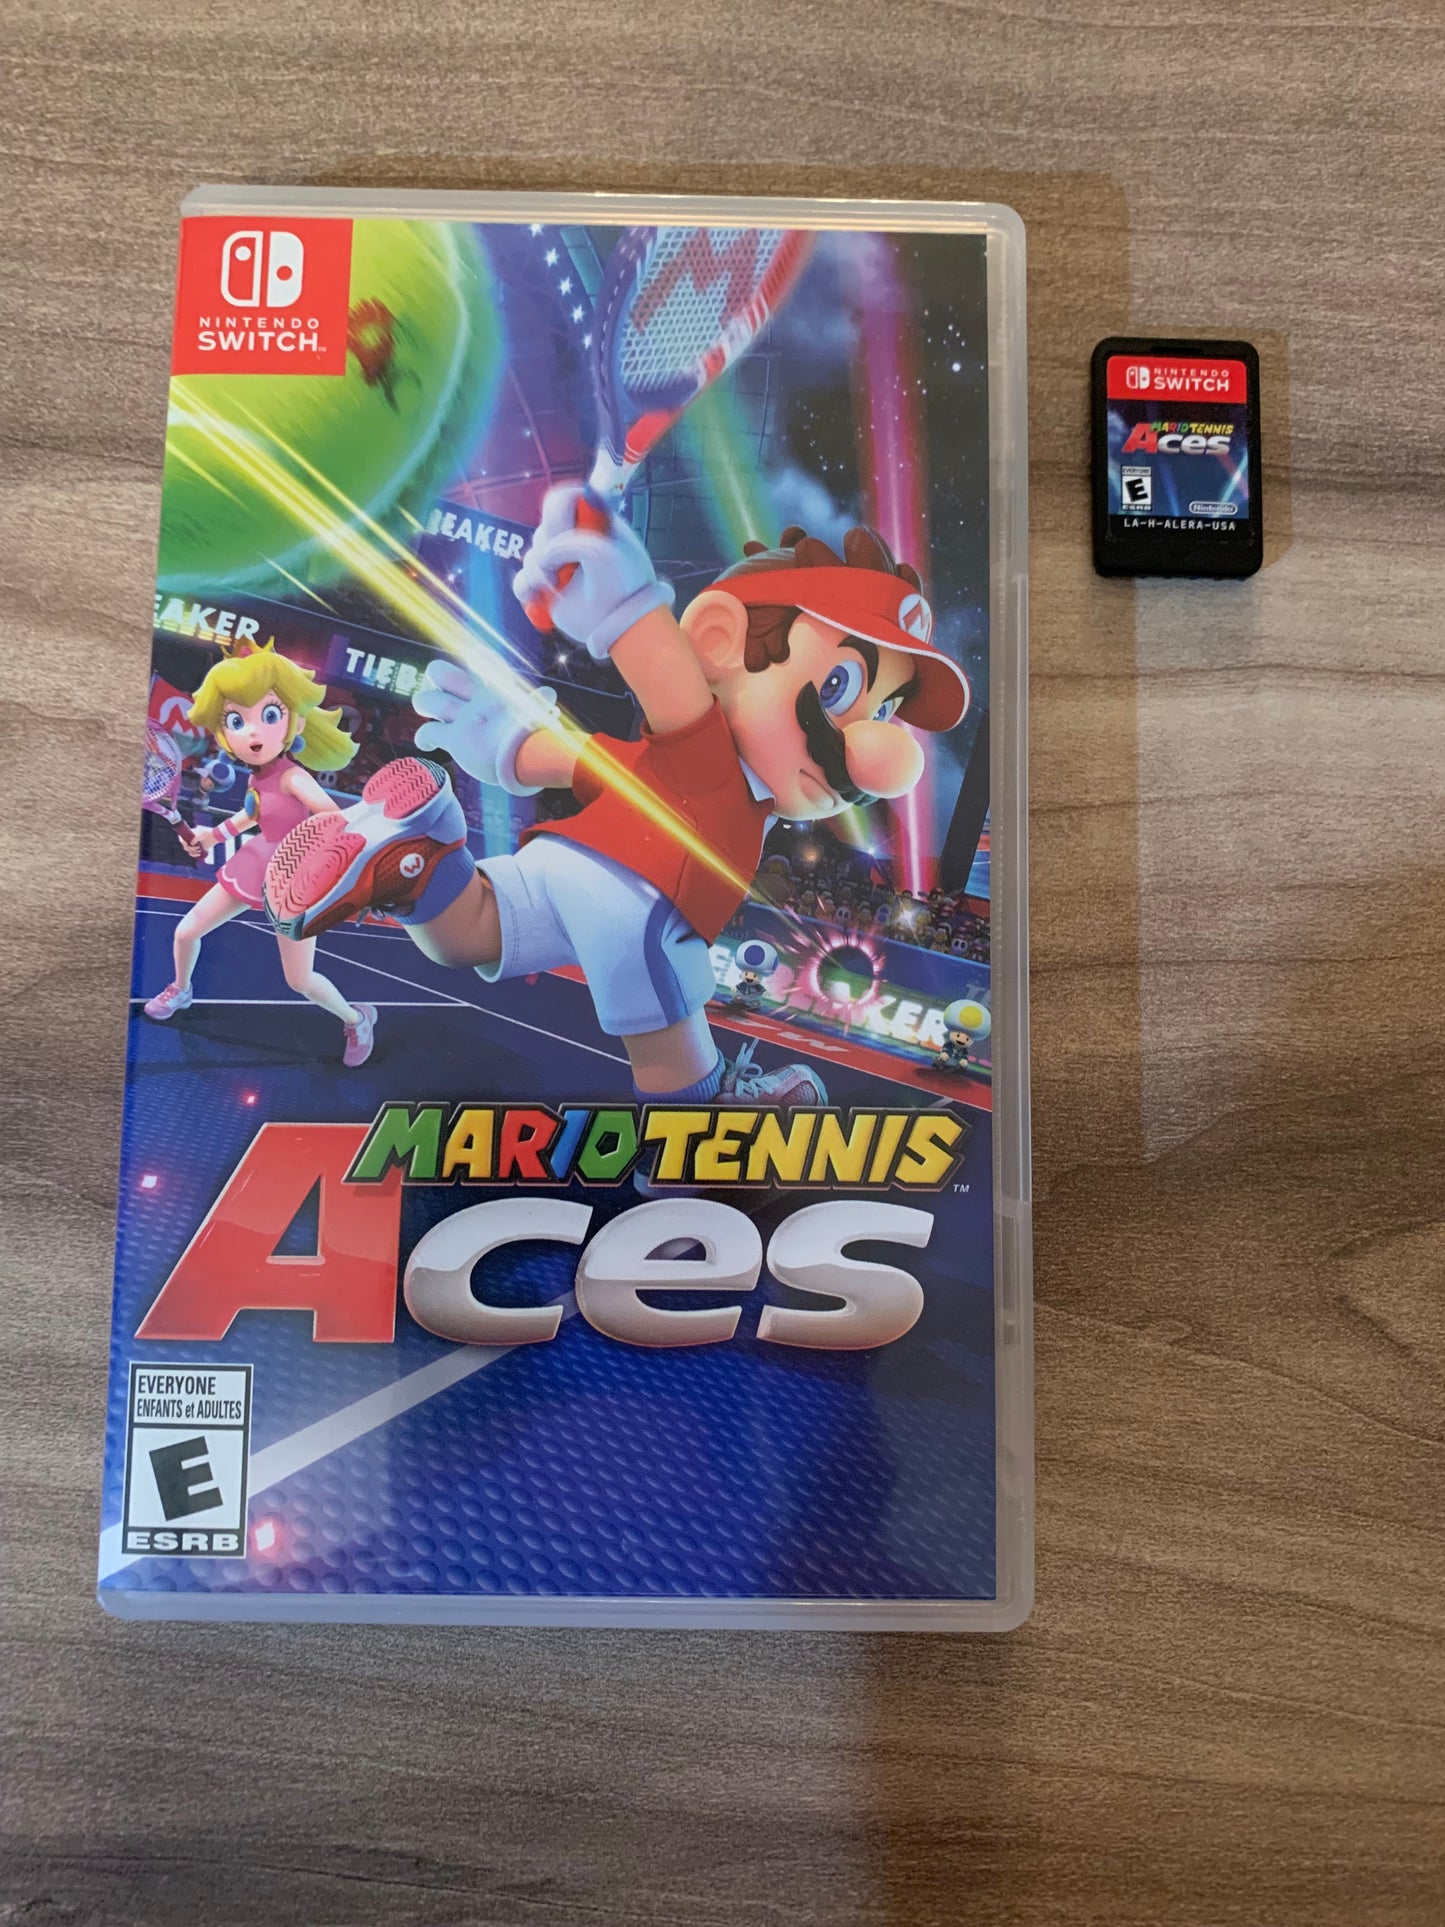 PiXEL-RETRO.COM : NINTENDO SWITCH NEW SEALED IN BOX COMPLETE MANUAL GAME NTSC MARIO TENNIS ACES